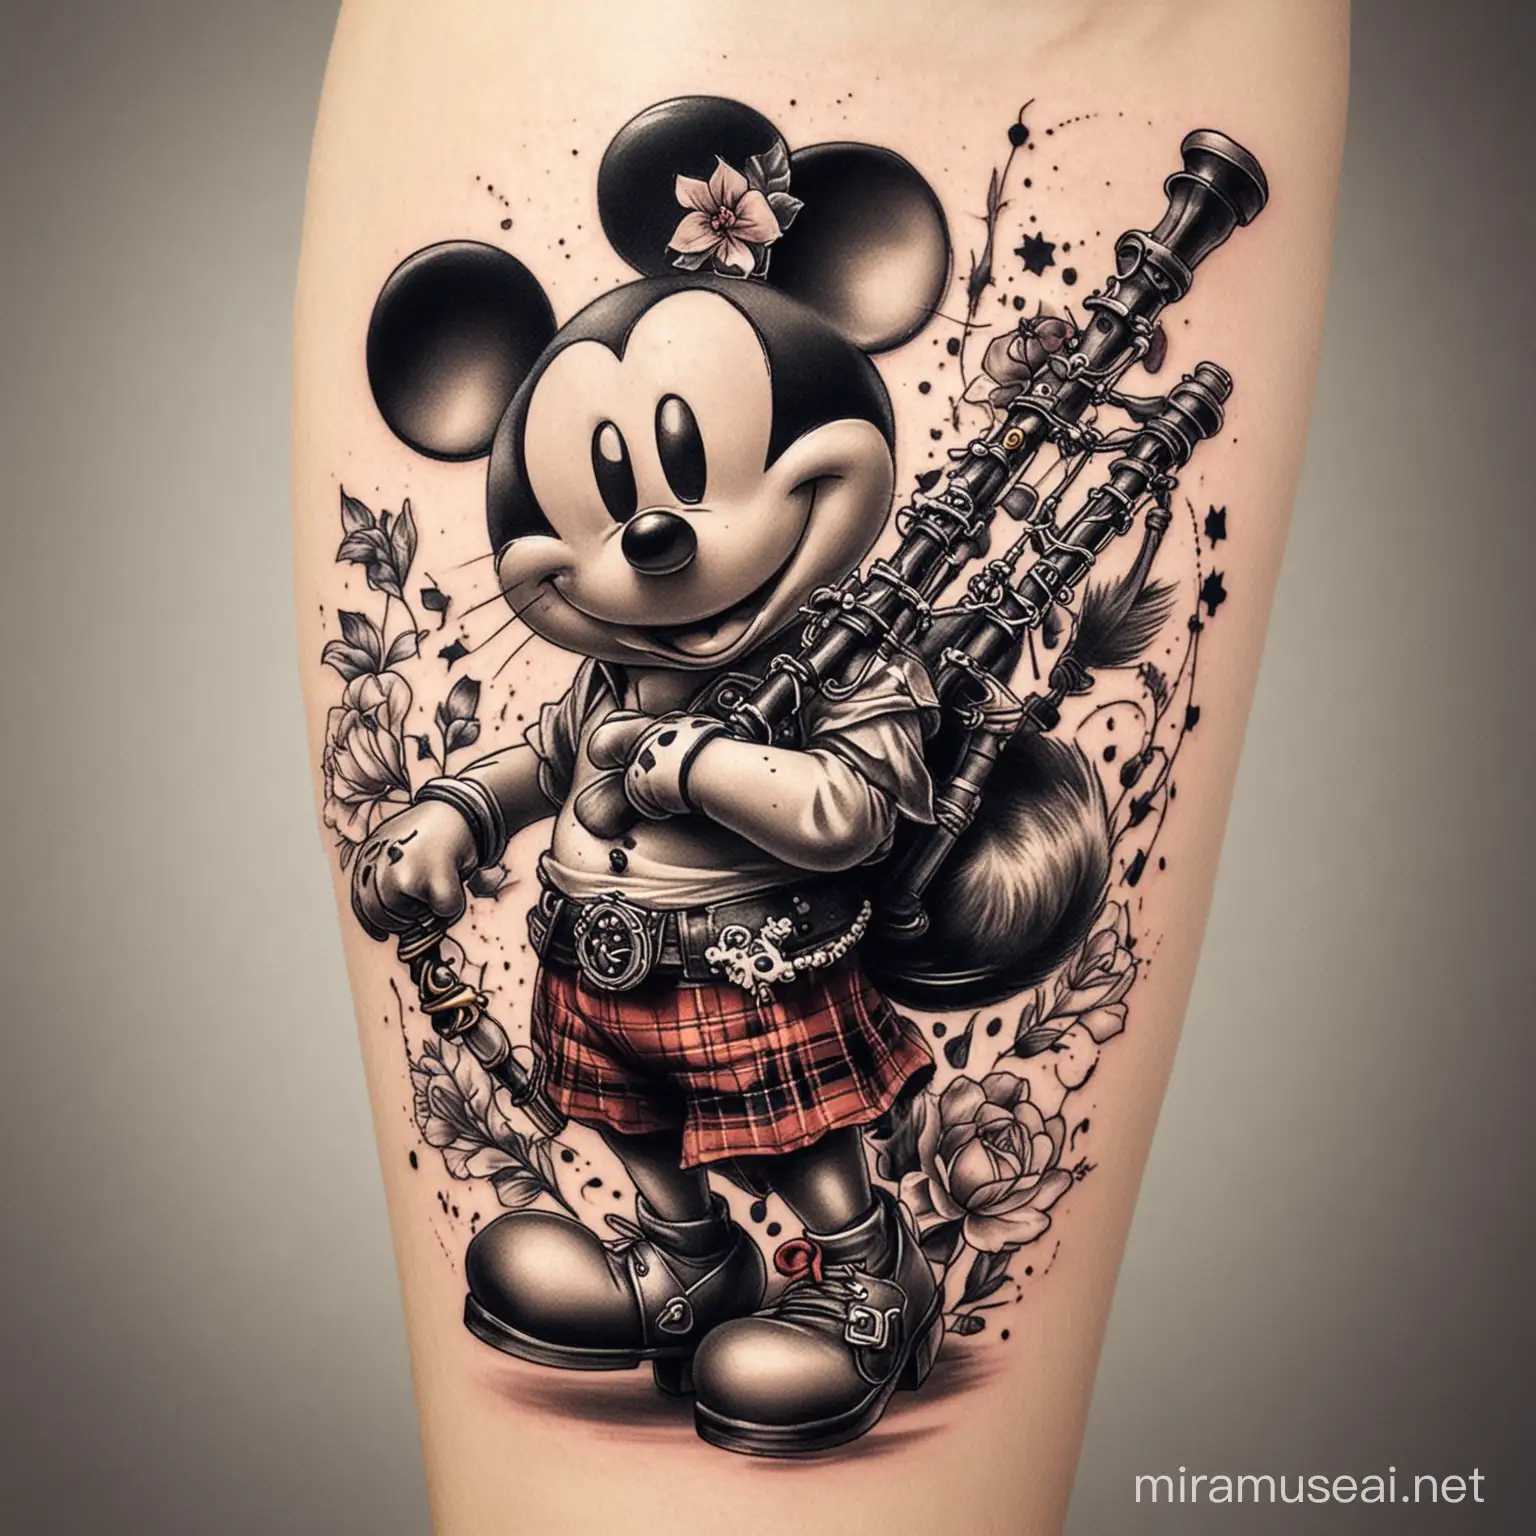 Whimsical Tattoo Design Mickey Mouse in High Heels Playing Bagpipes with a Lucky Cat